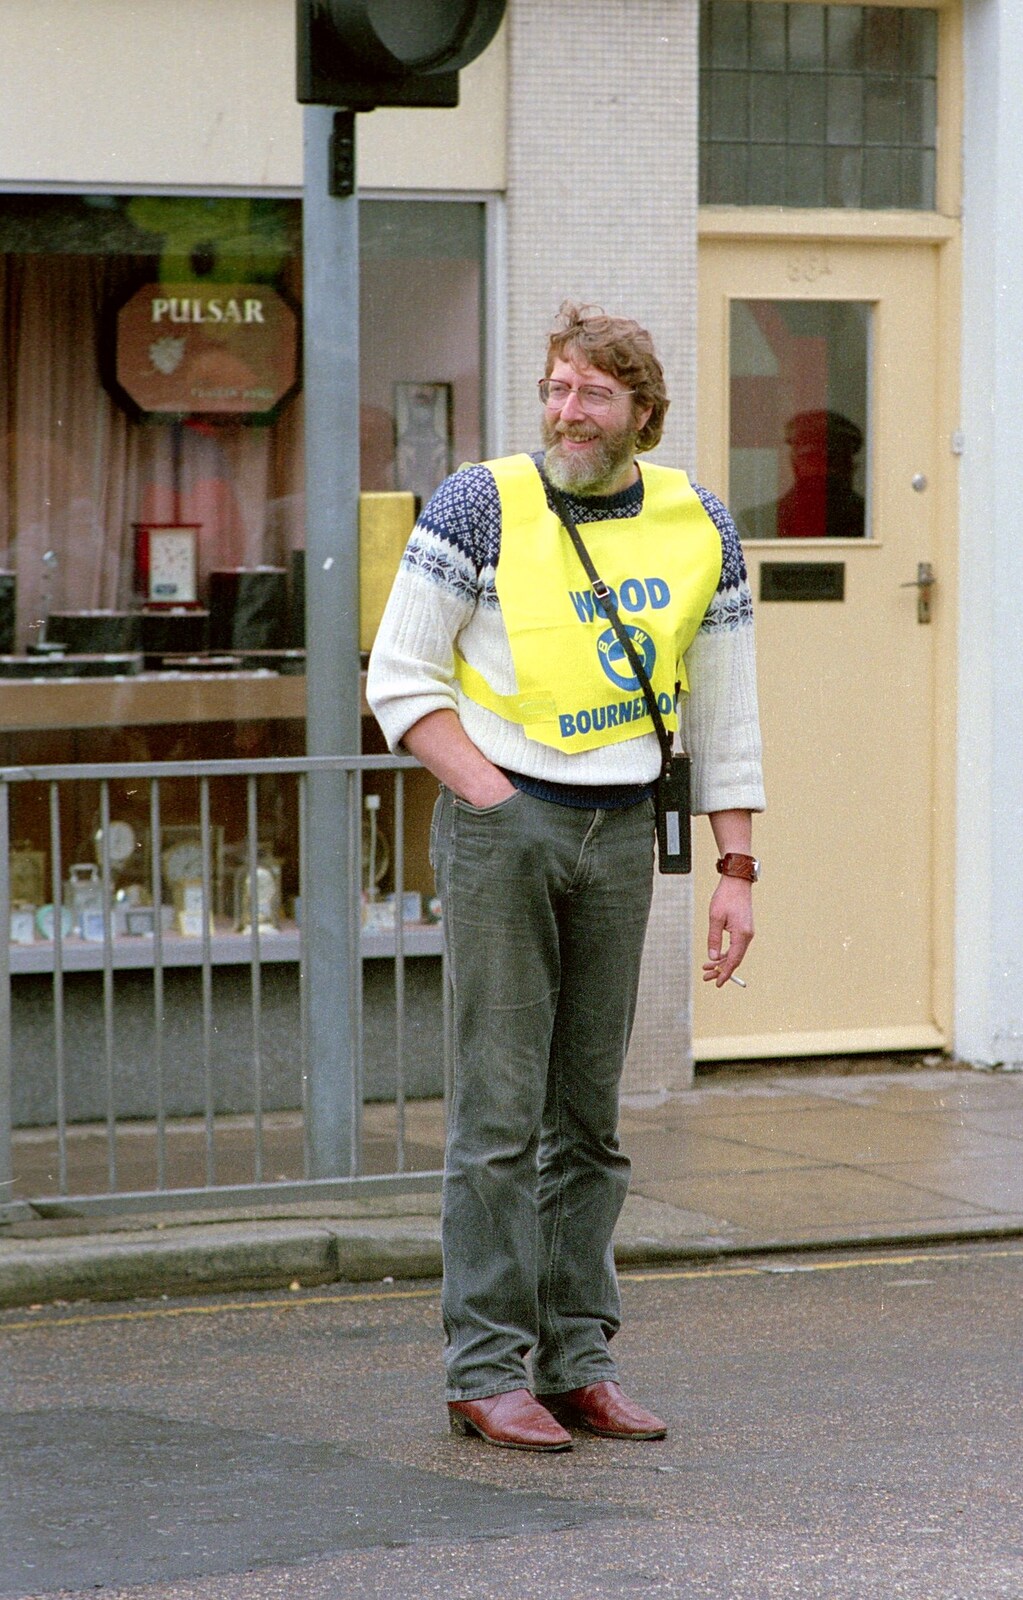 CB Pete by Charles Nobel the jewellers from The New Forest Marathon, New Milton, Hampshire - 14th September 1986